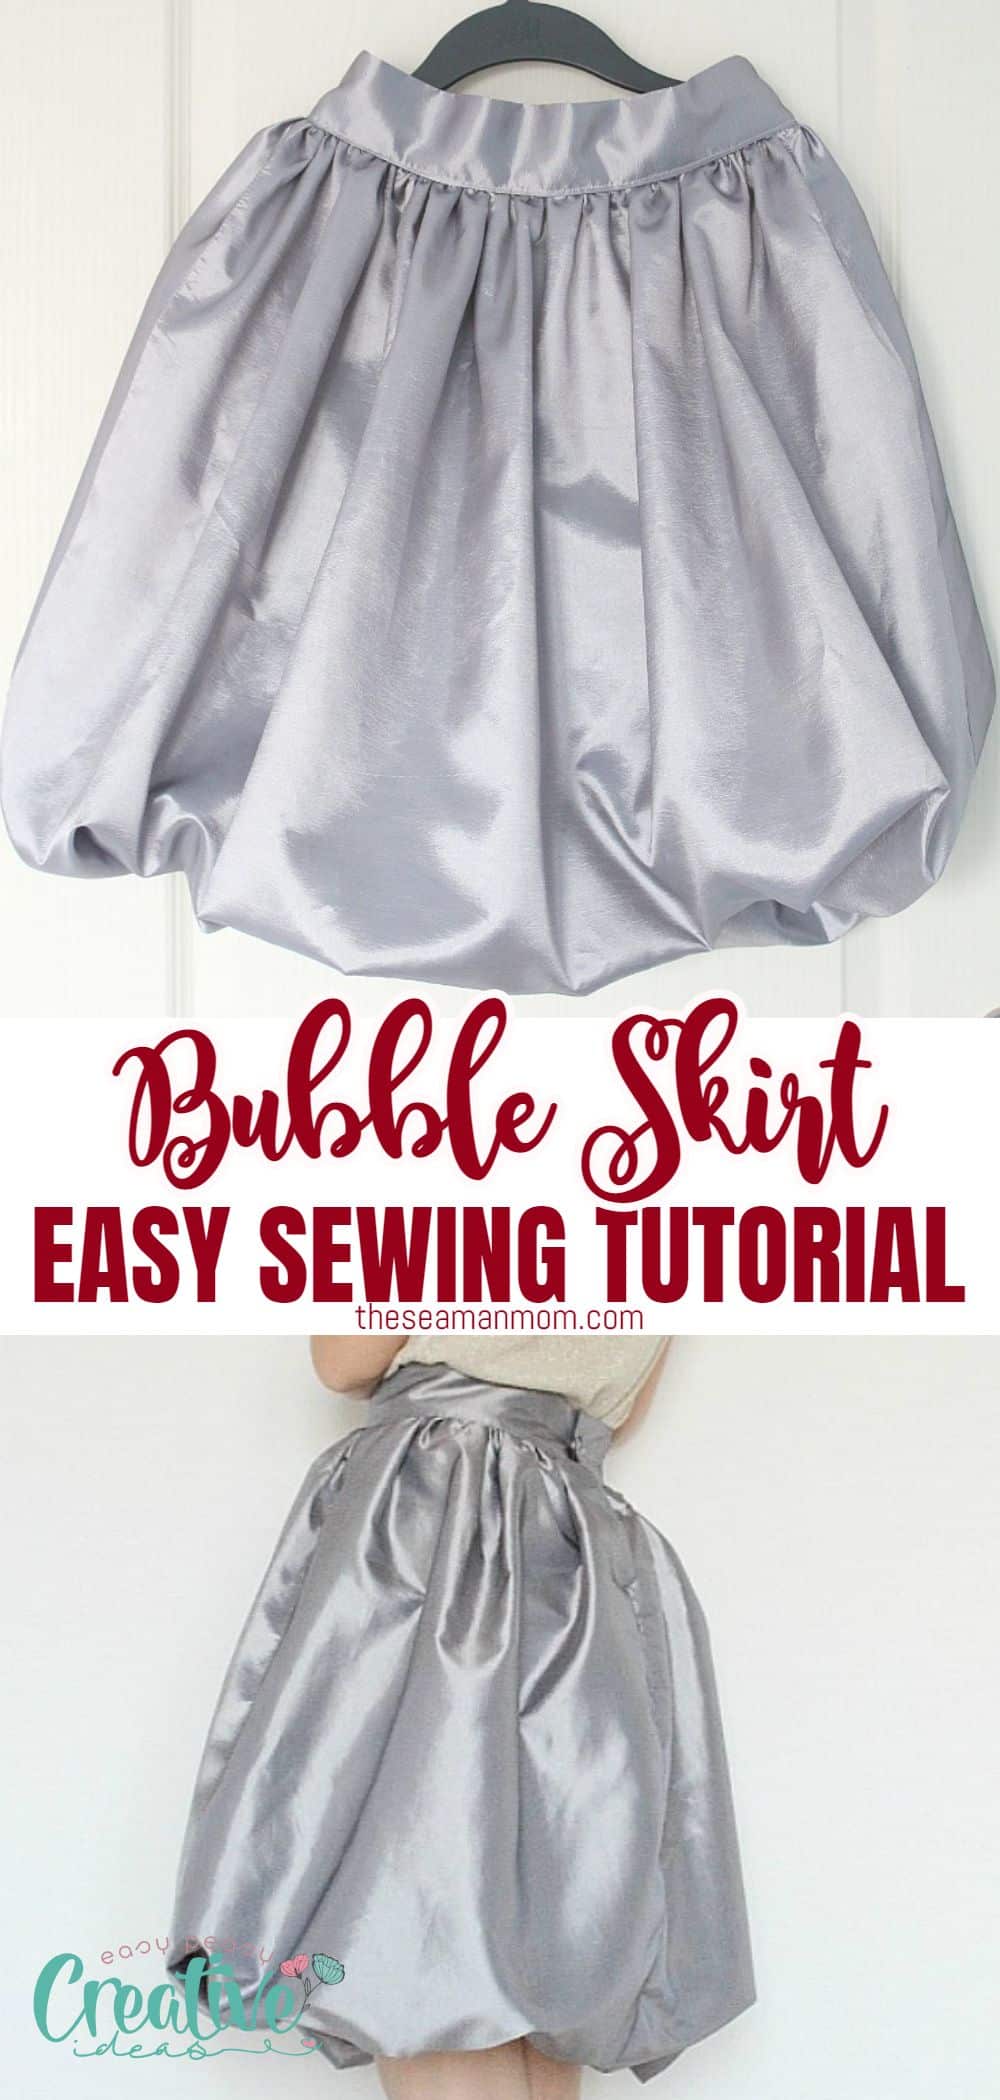 How To Sew An Easy Bubble Skirt  anickadesign